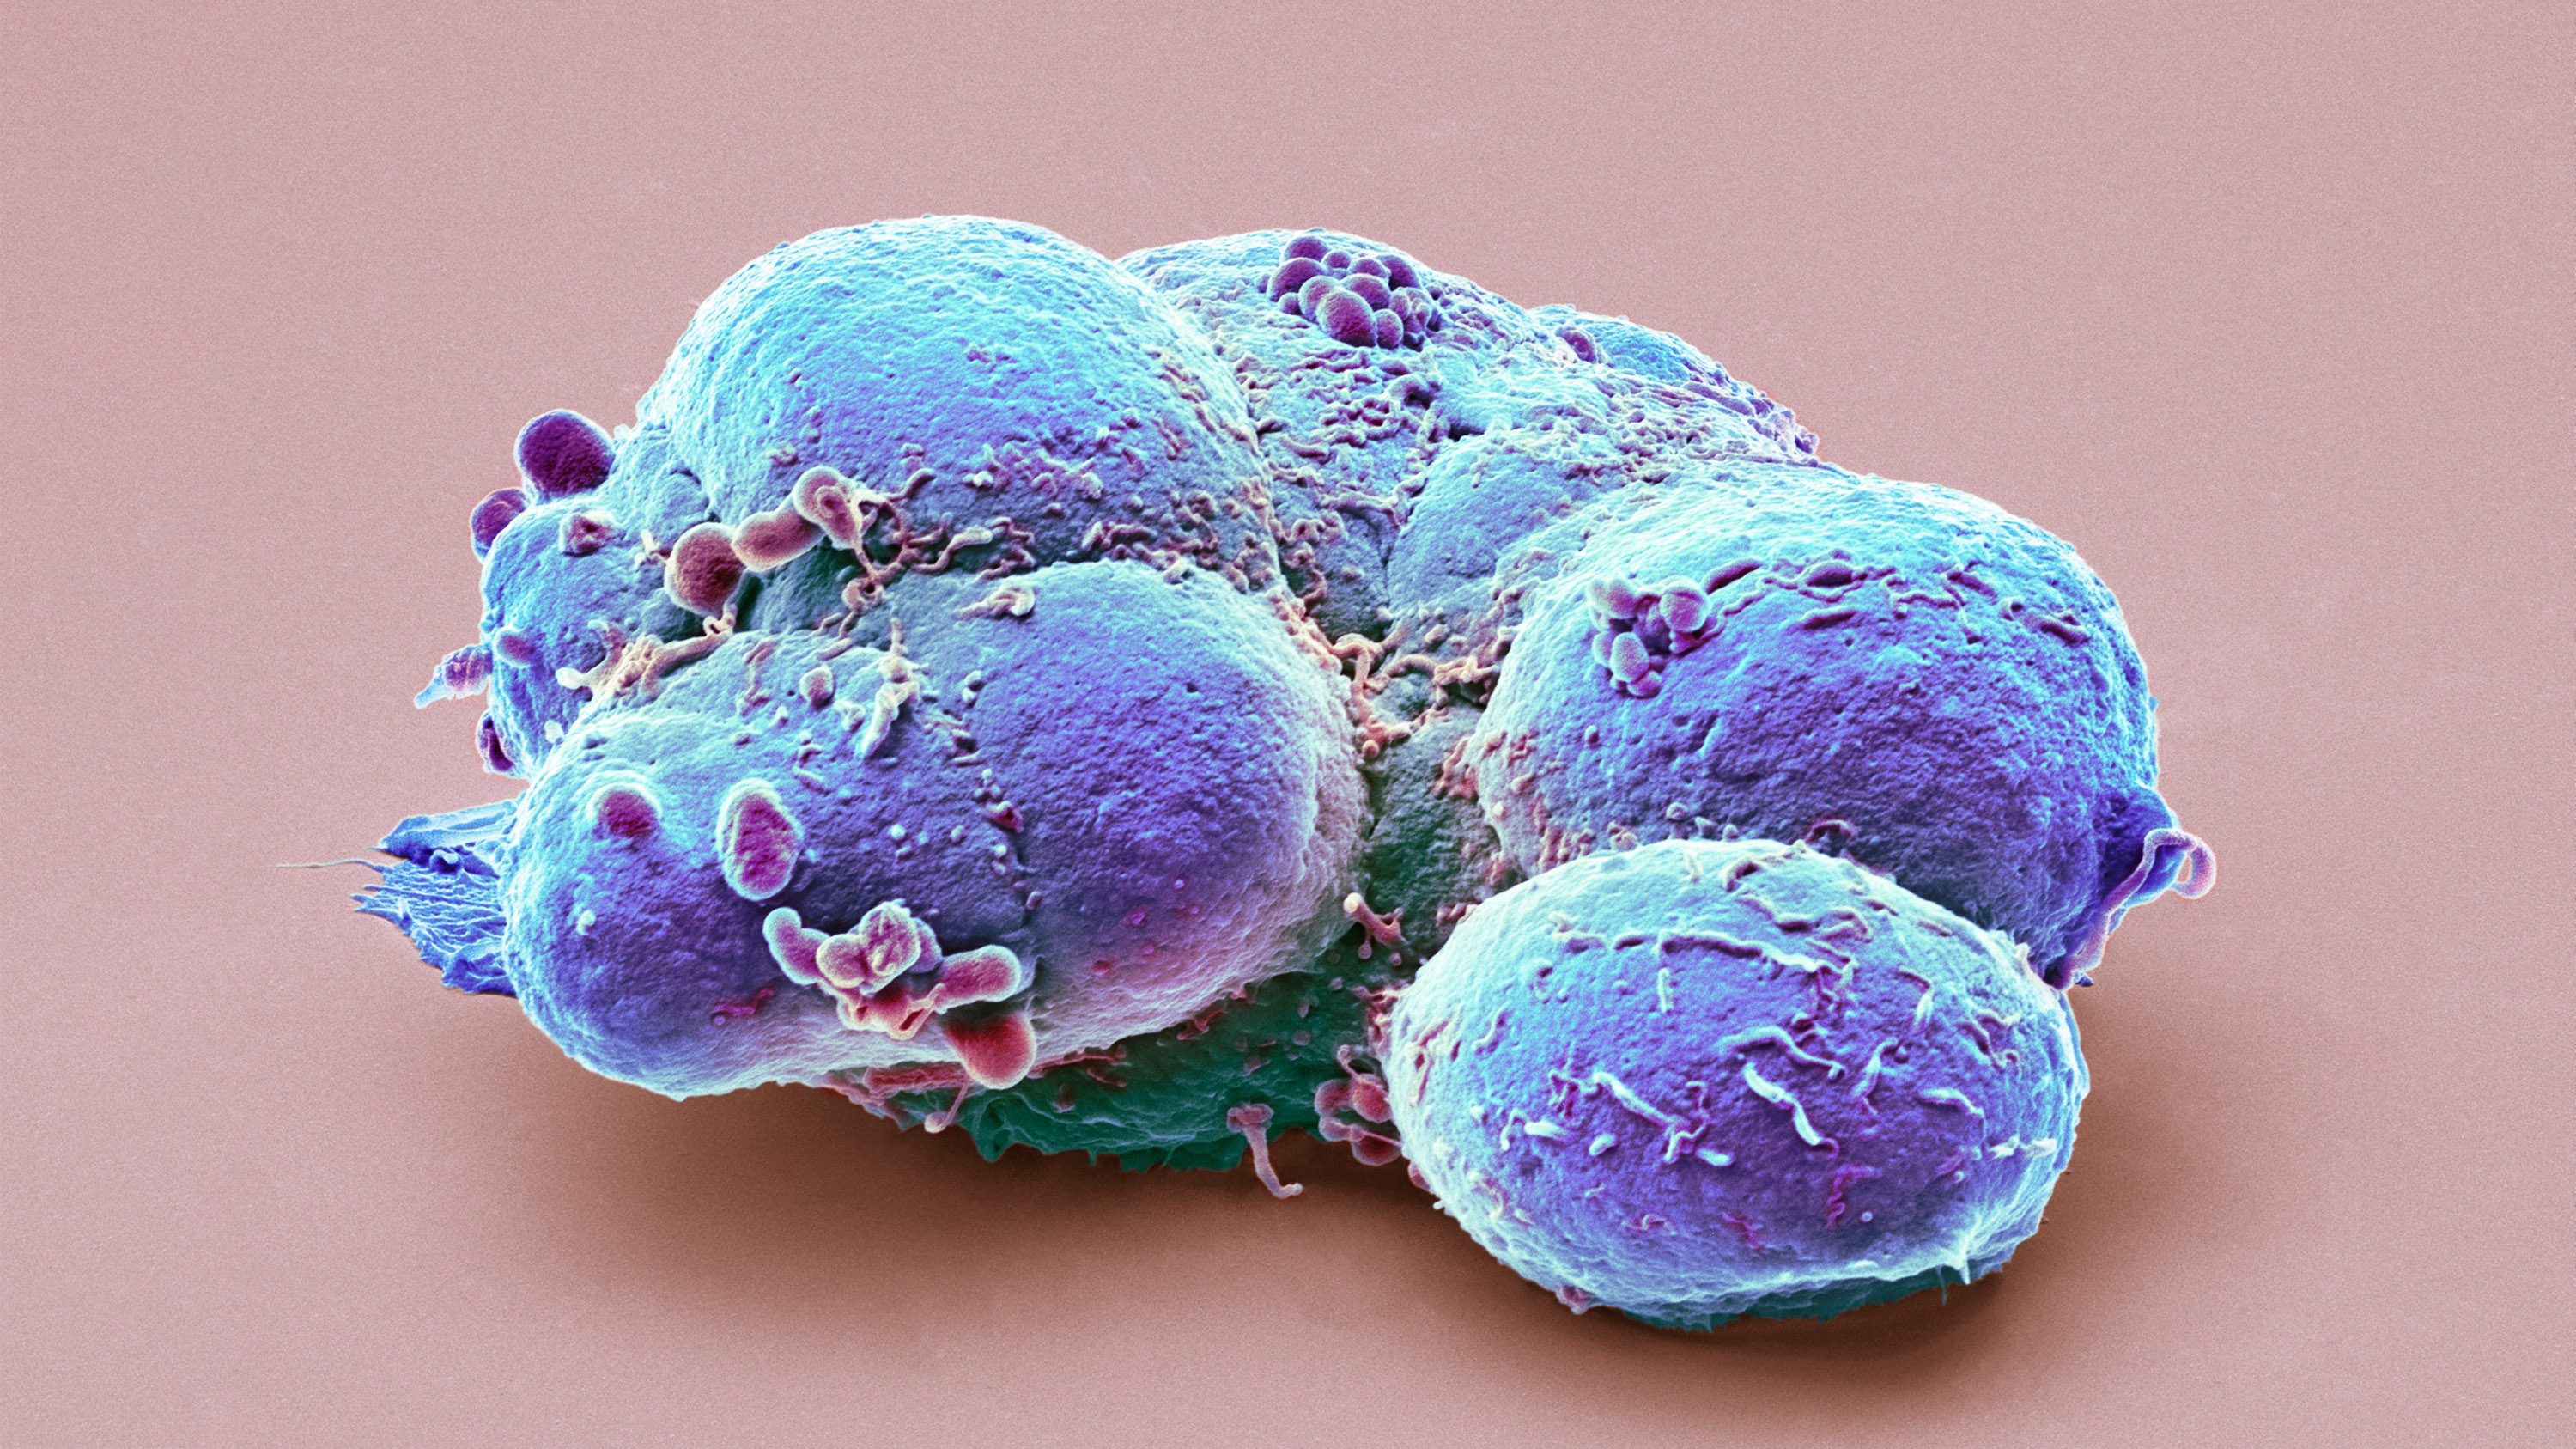 After 25 years of hype, embryonic stem cells still don't cure for